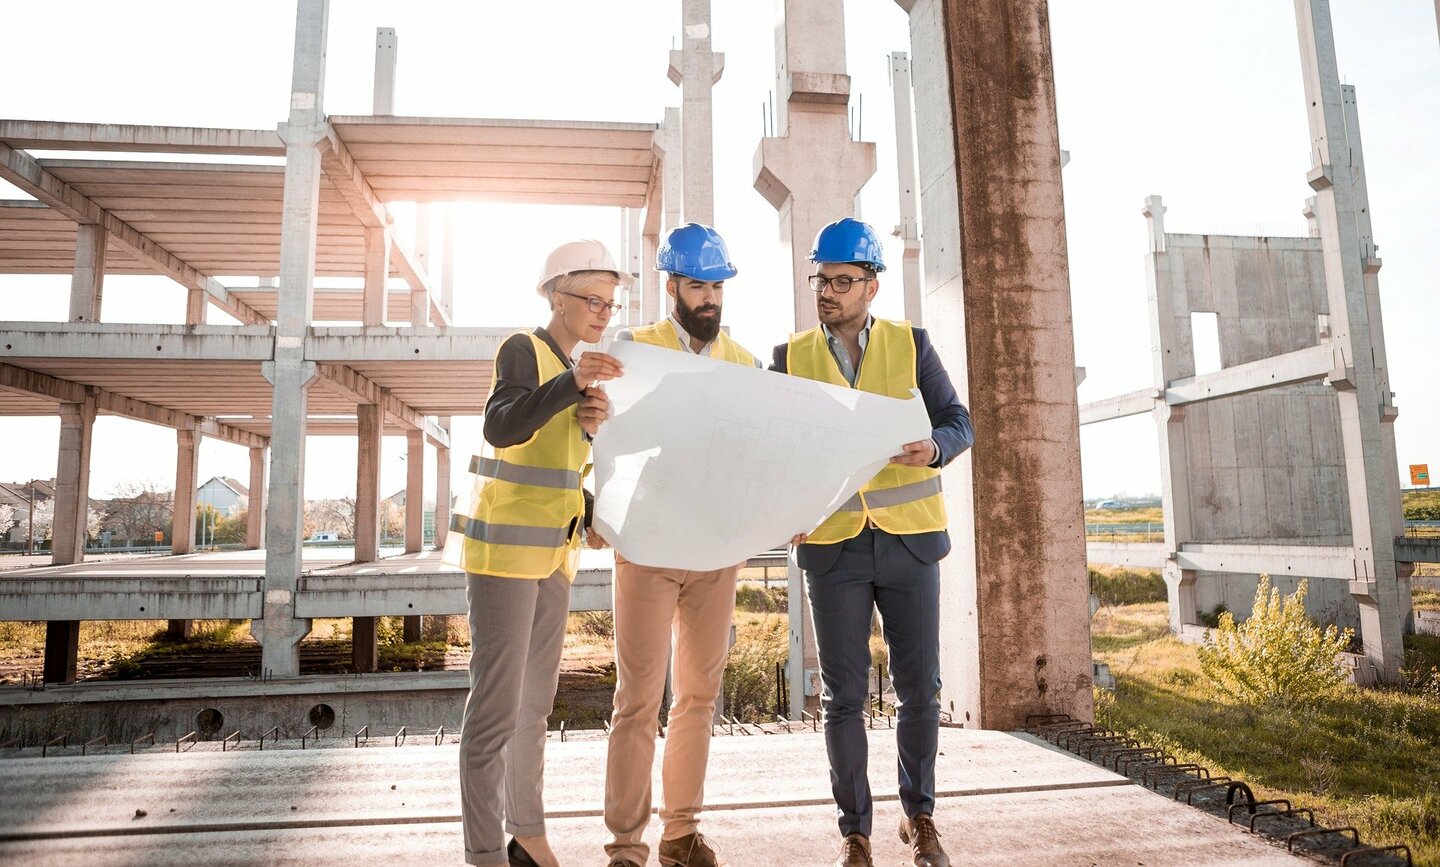 Three person wearing workwear watching a blueprint in a construction site